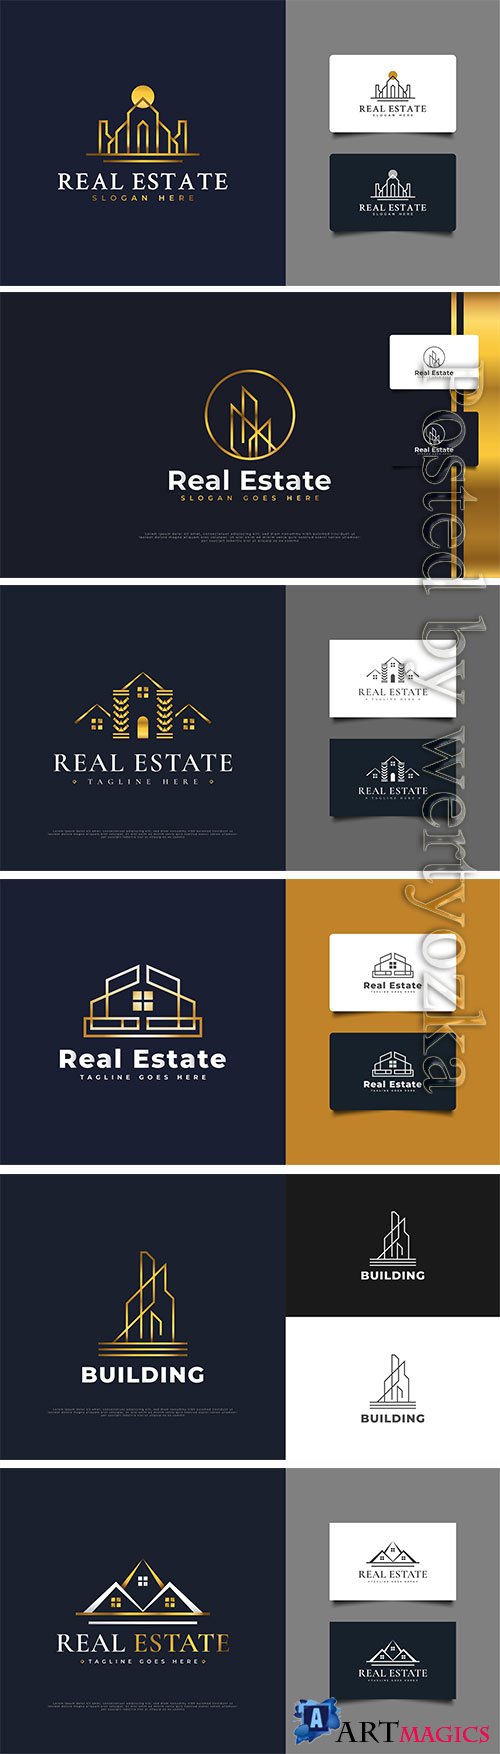 Luxury real estate logo vector design in white and gold